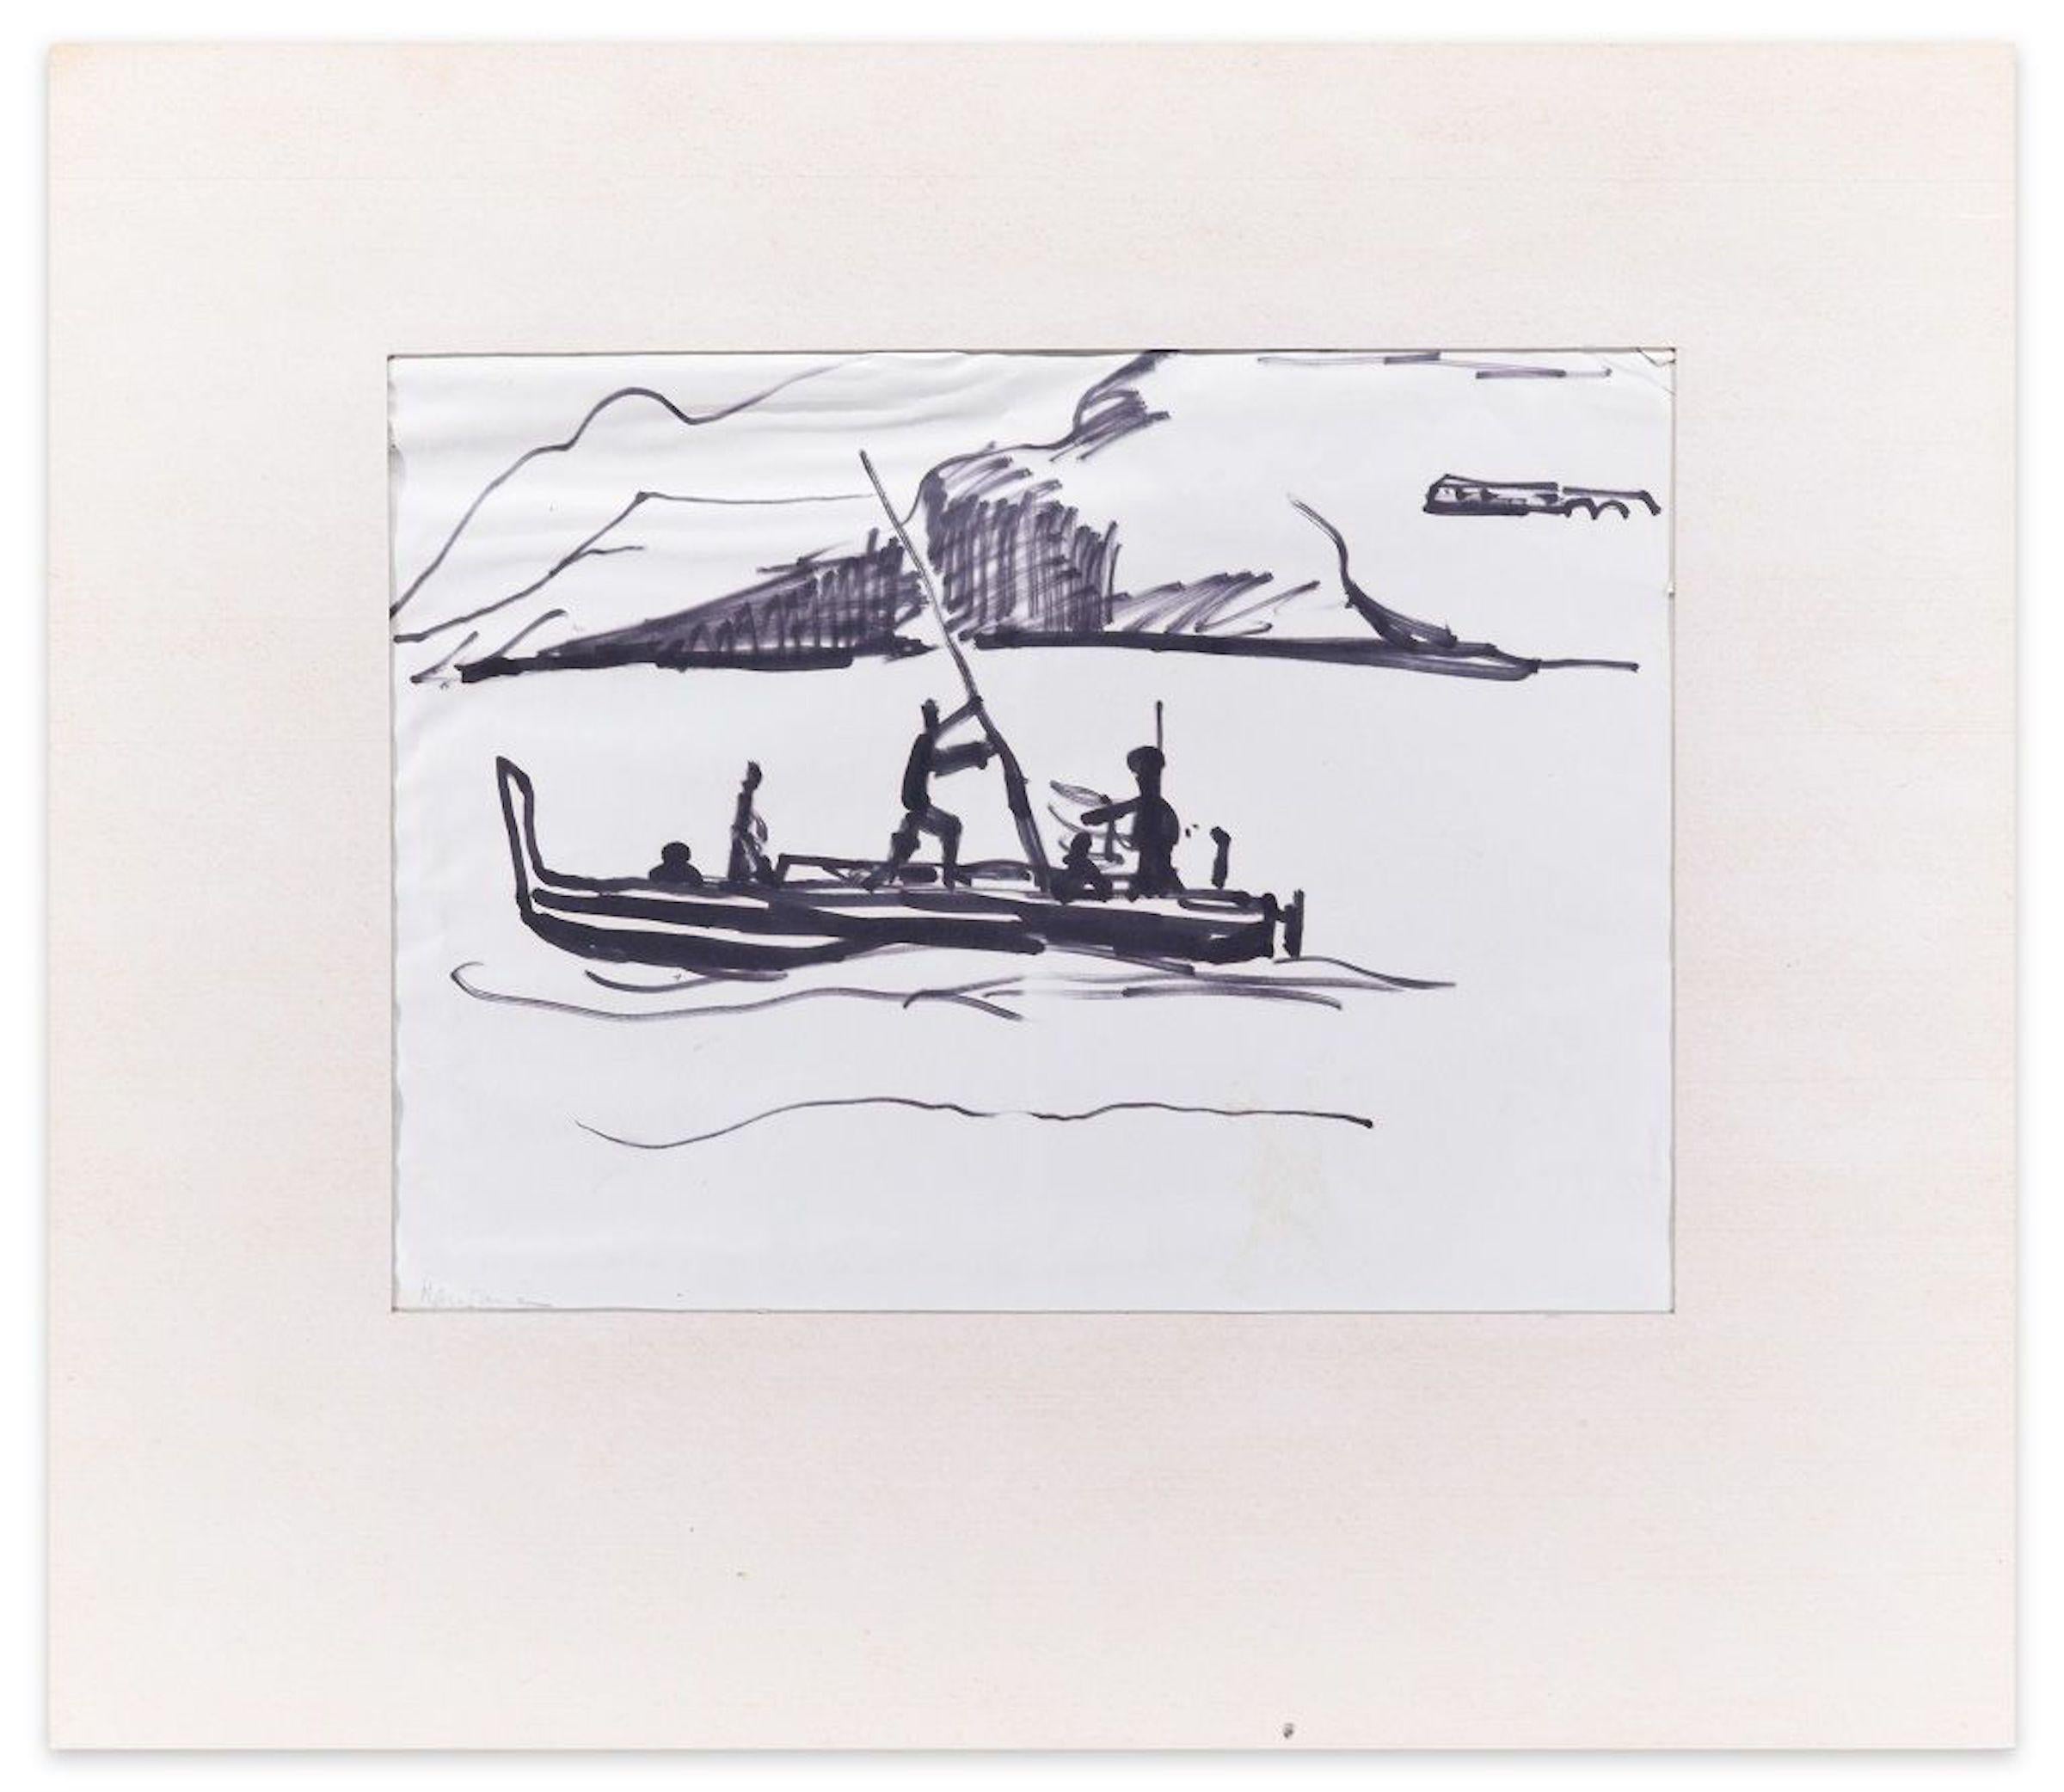 Gondola - lack Marker Drawing on Paper - Mid 20th Century - Art by Unknown